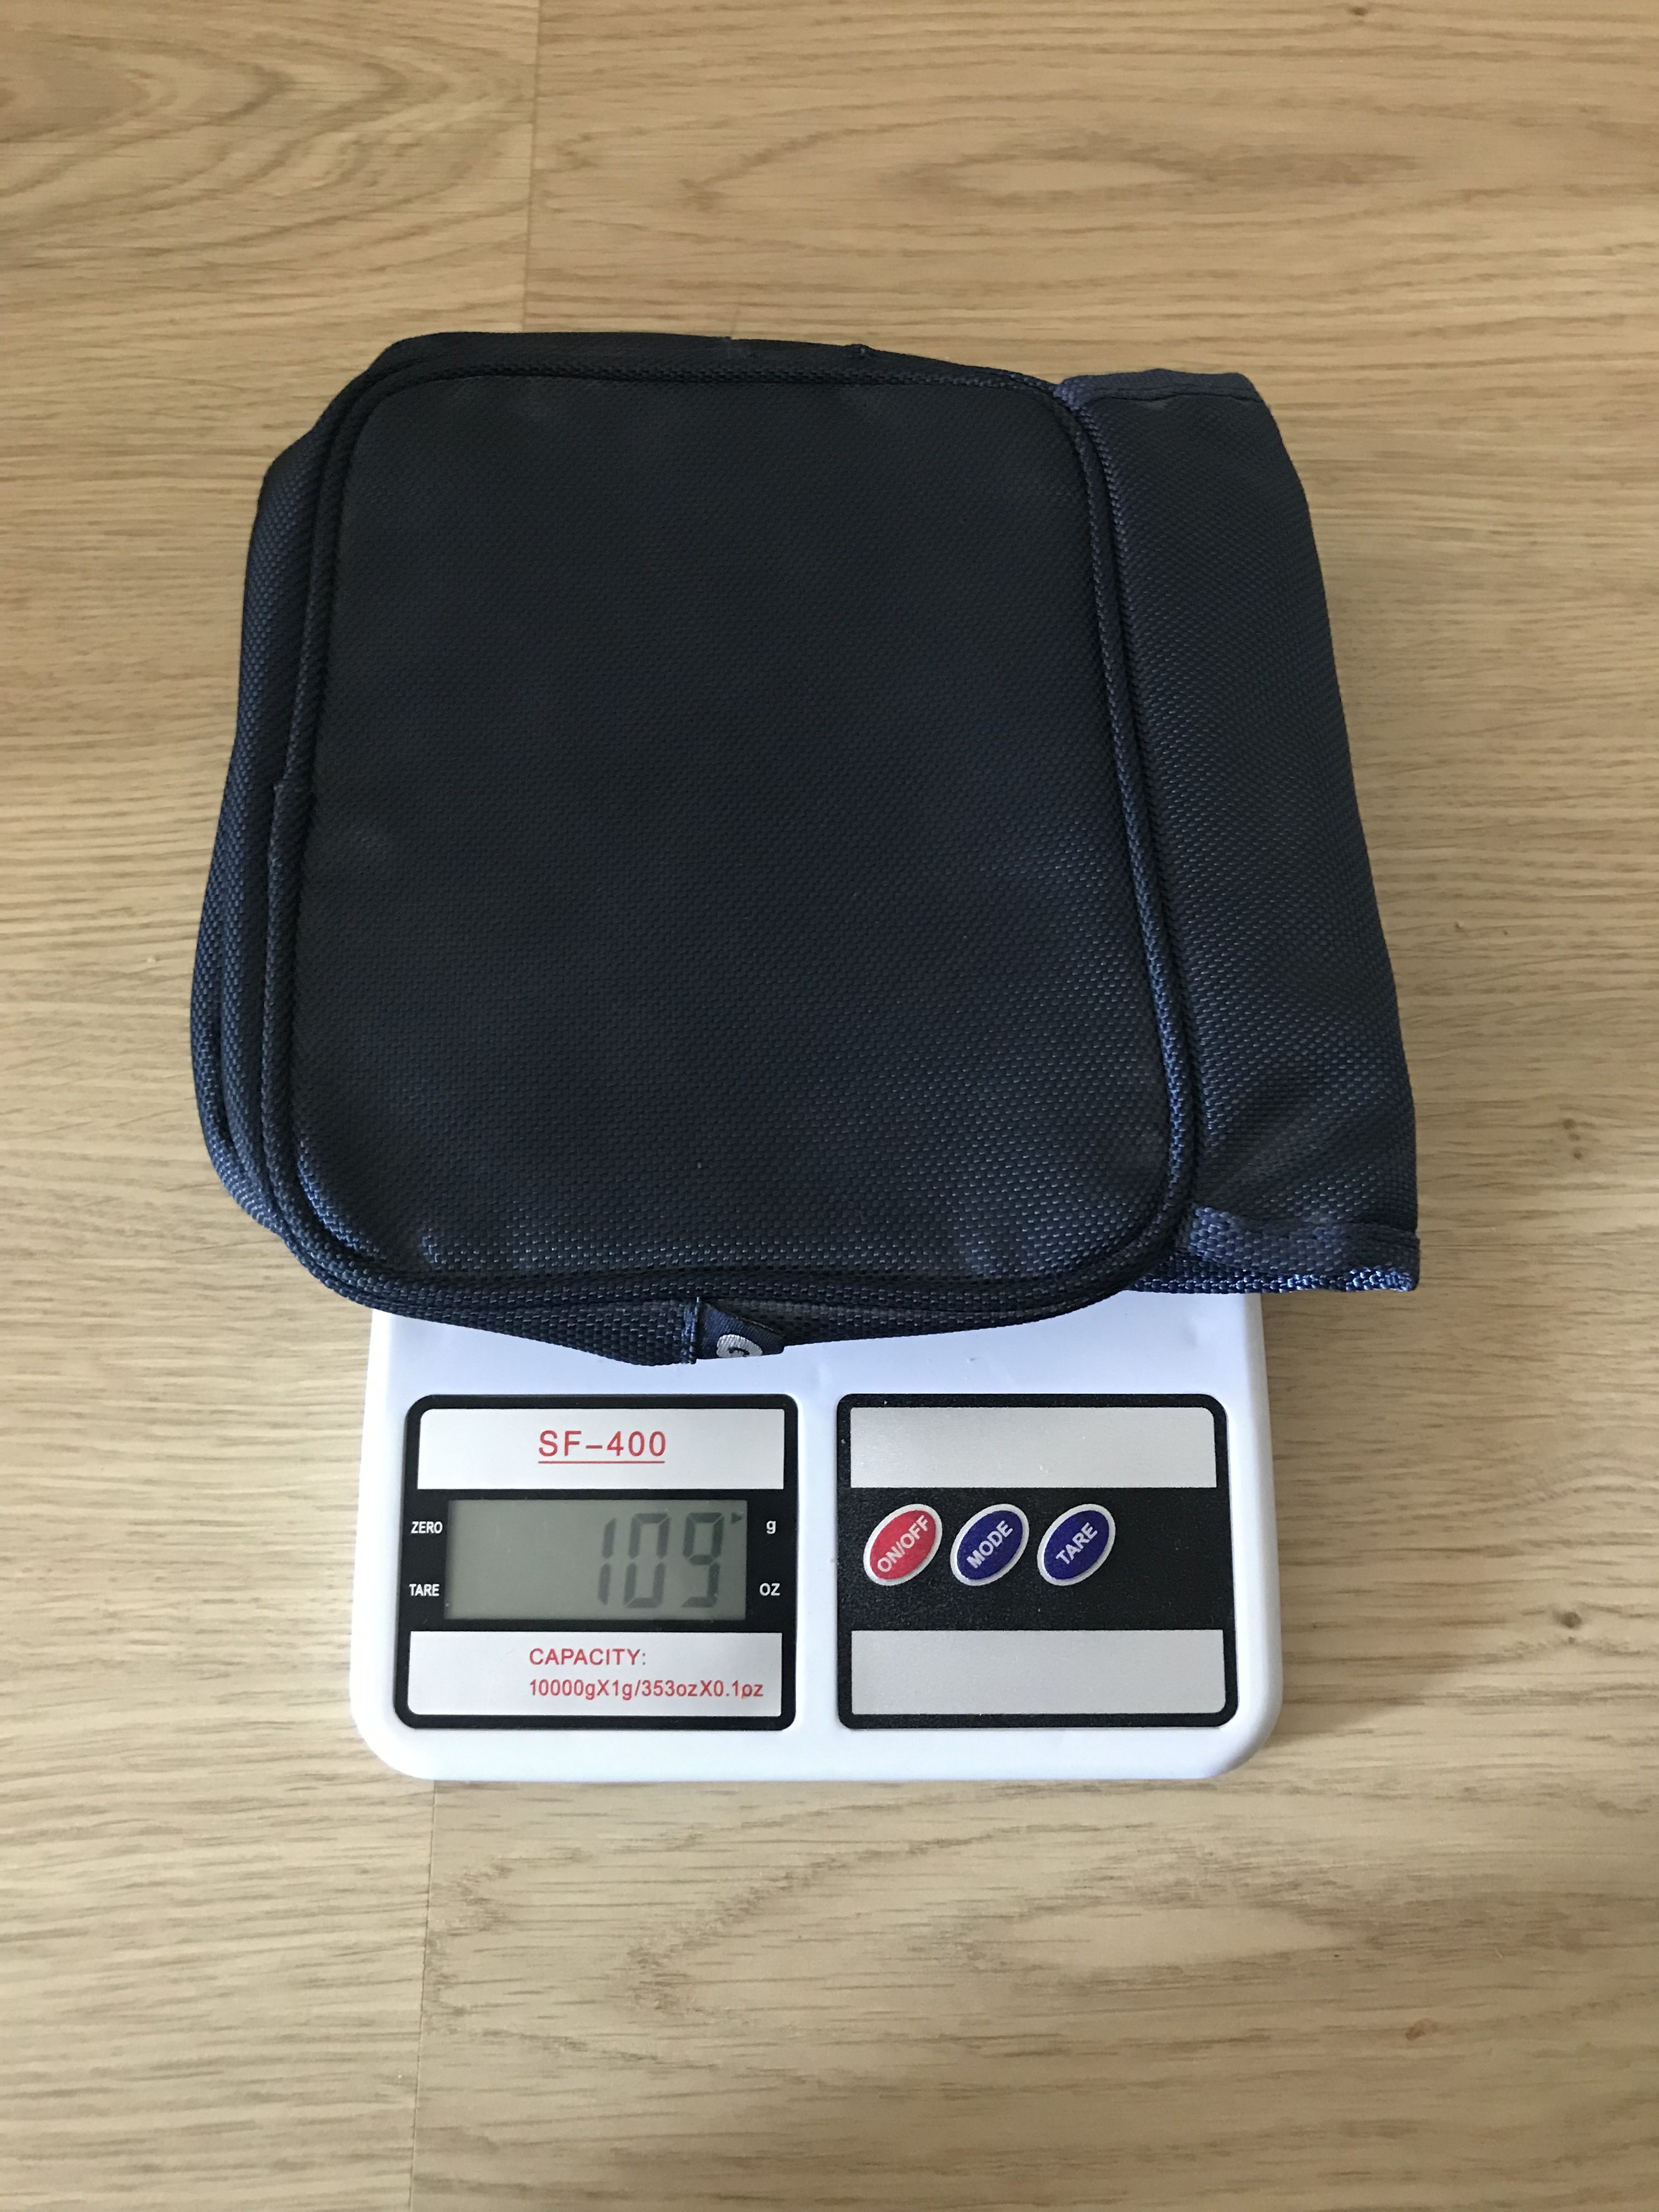 cosmetic bag weight